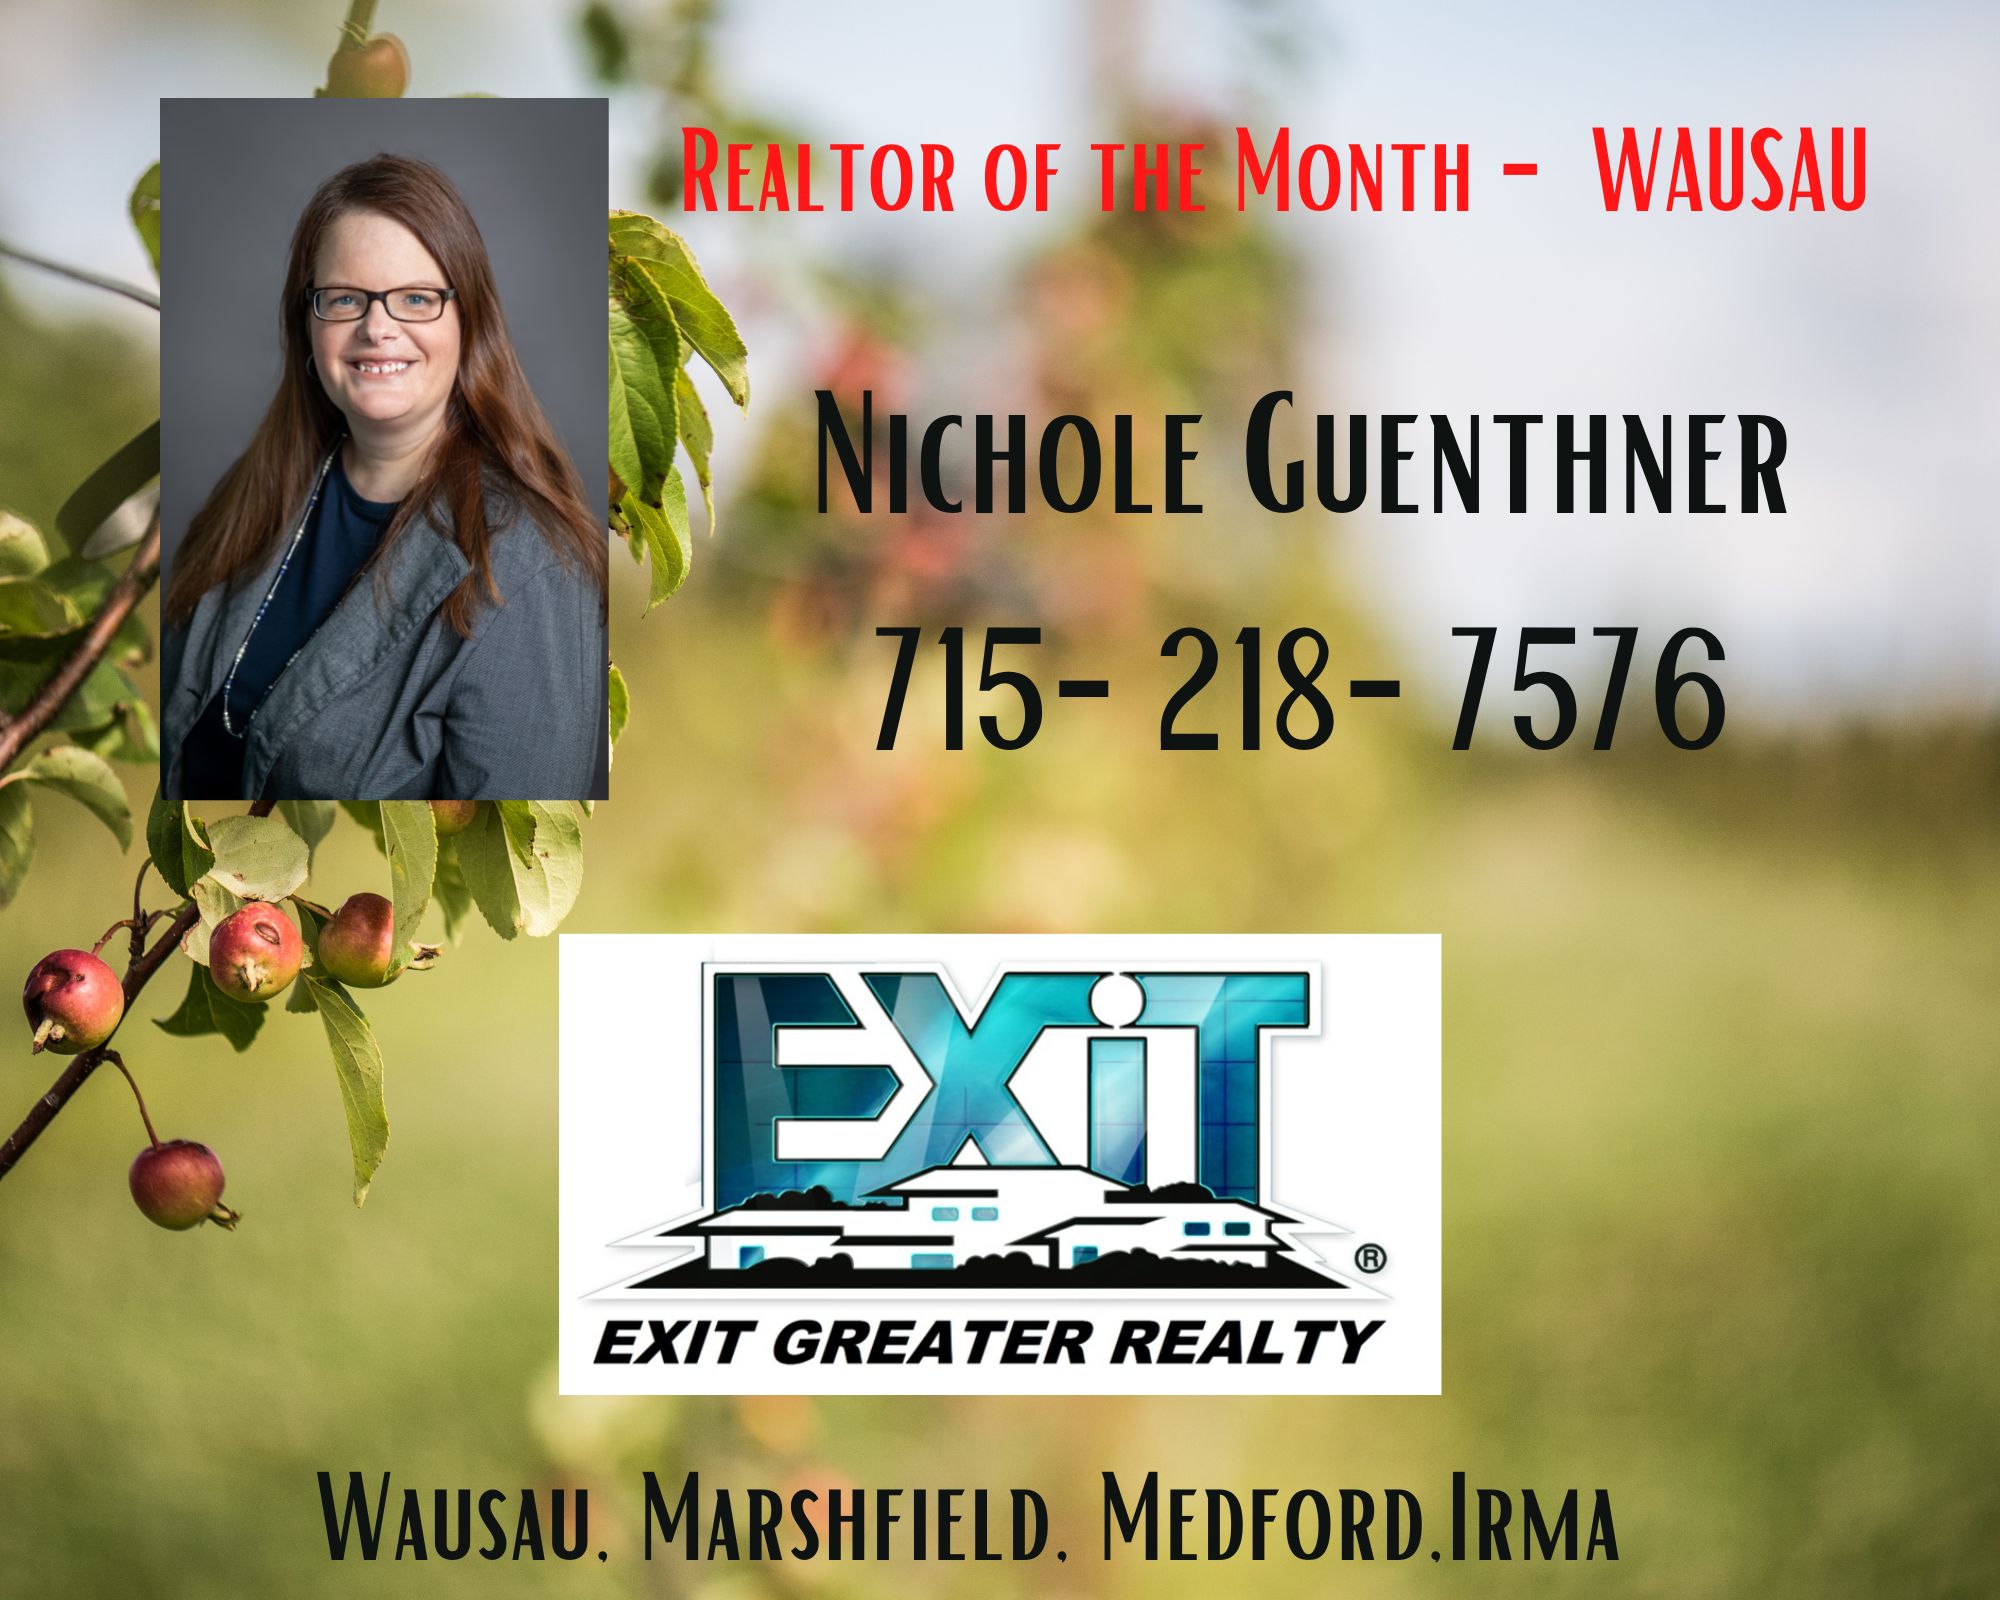 August's Realtor® of the Month